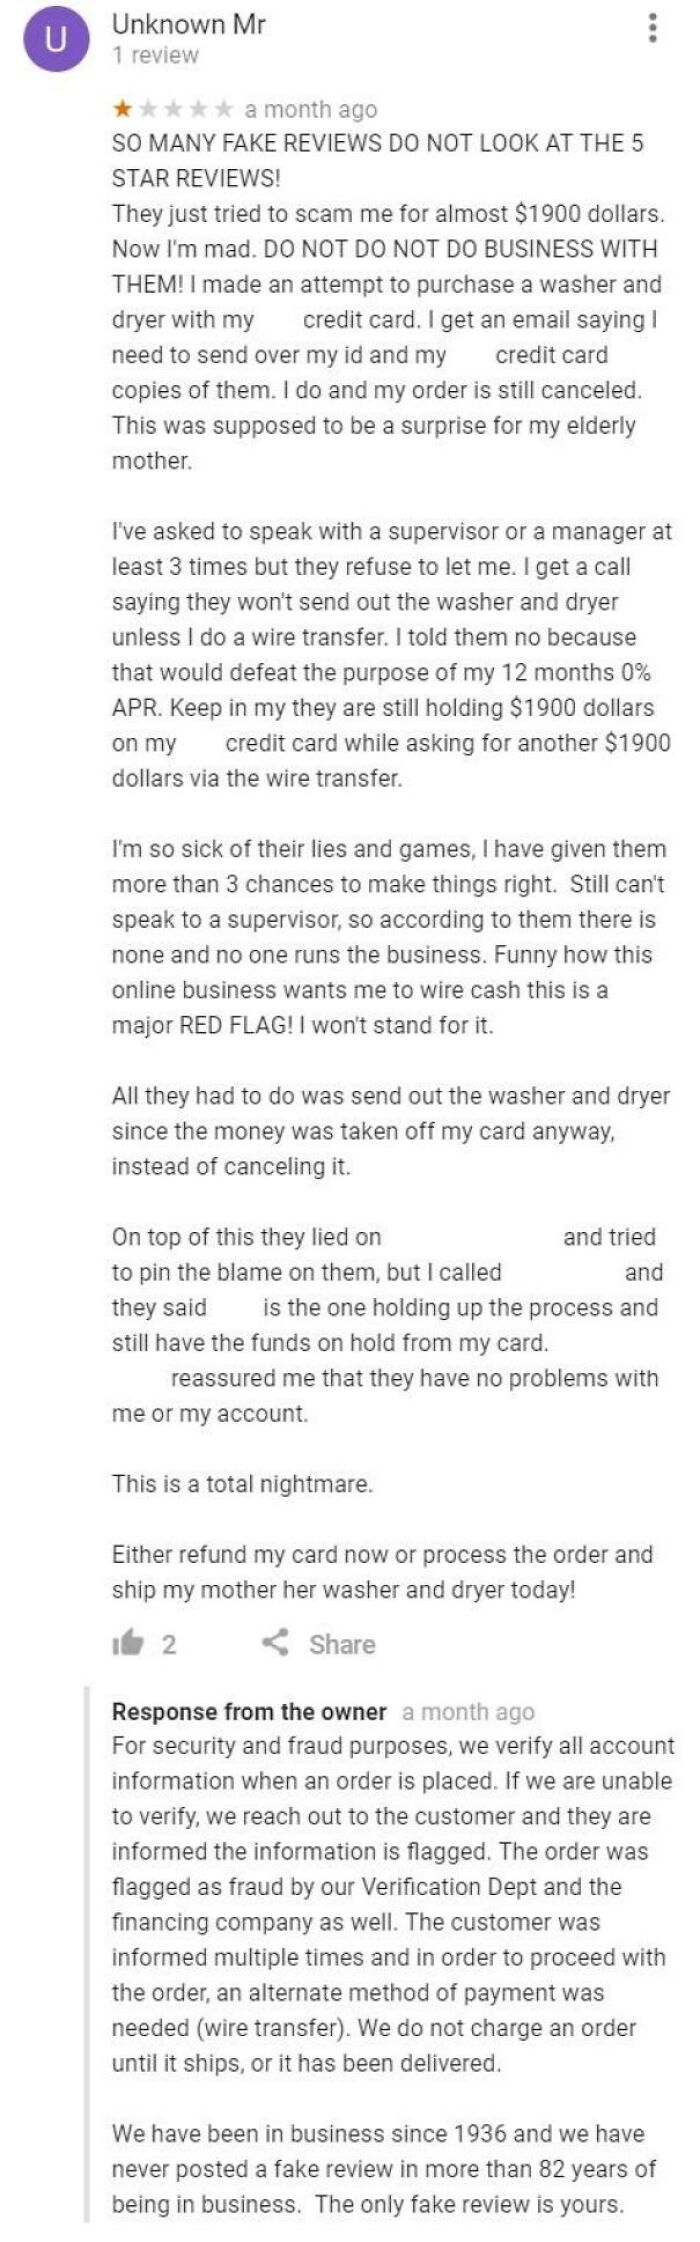 Angry Customer Doesn't Understand Fraud And Fake Reviews